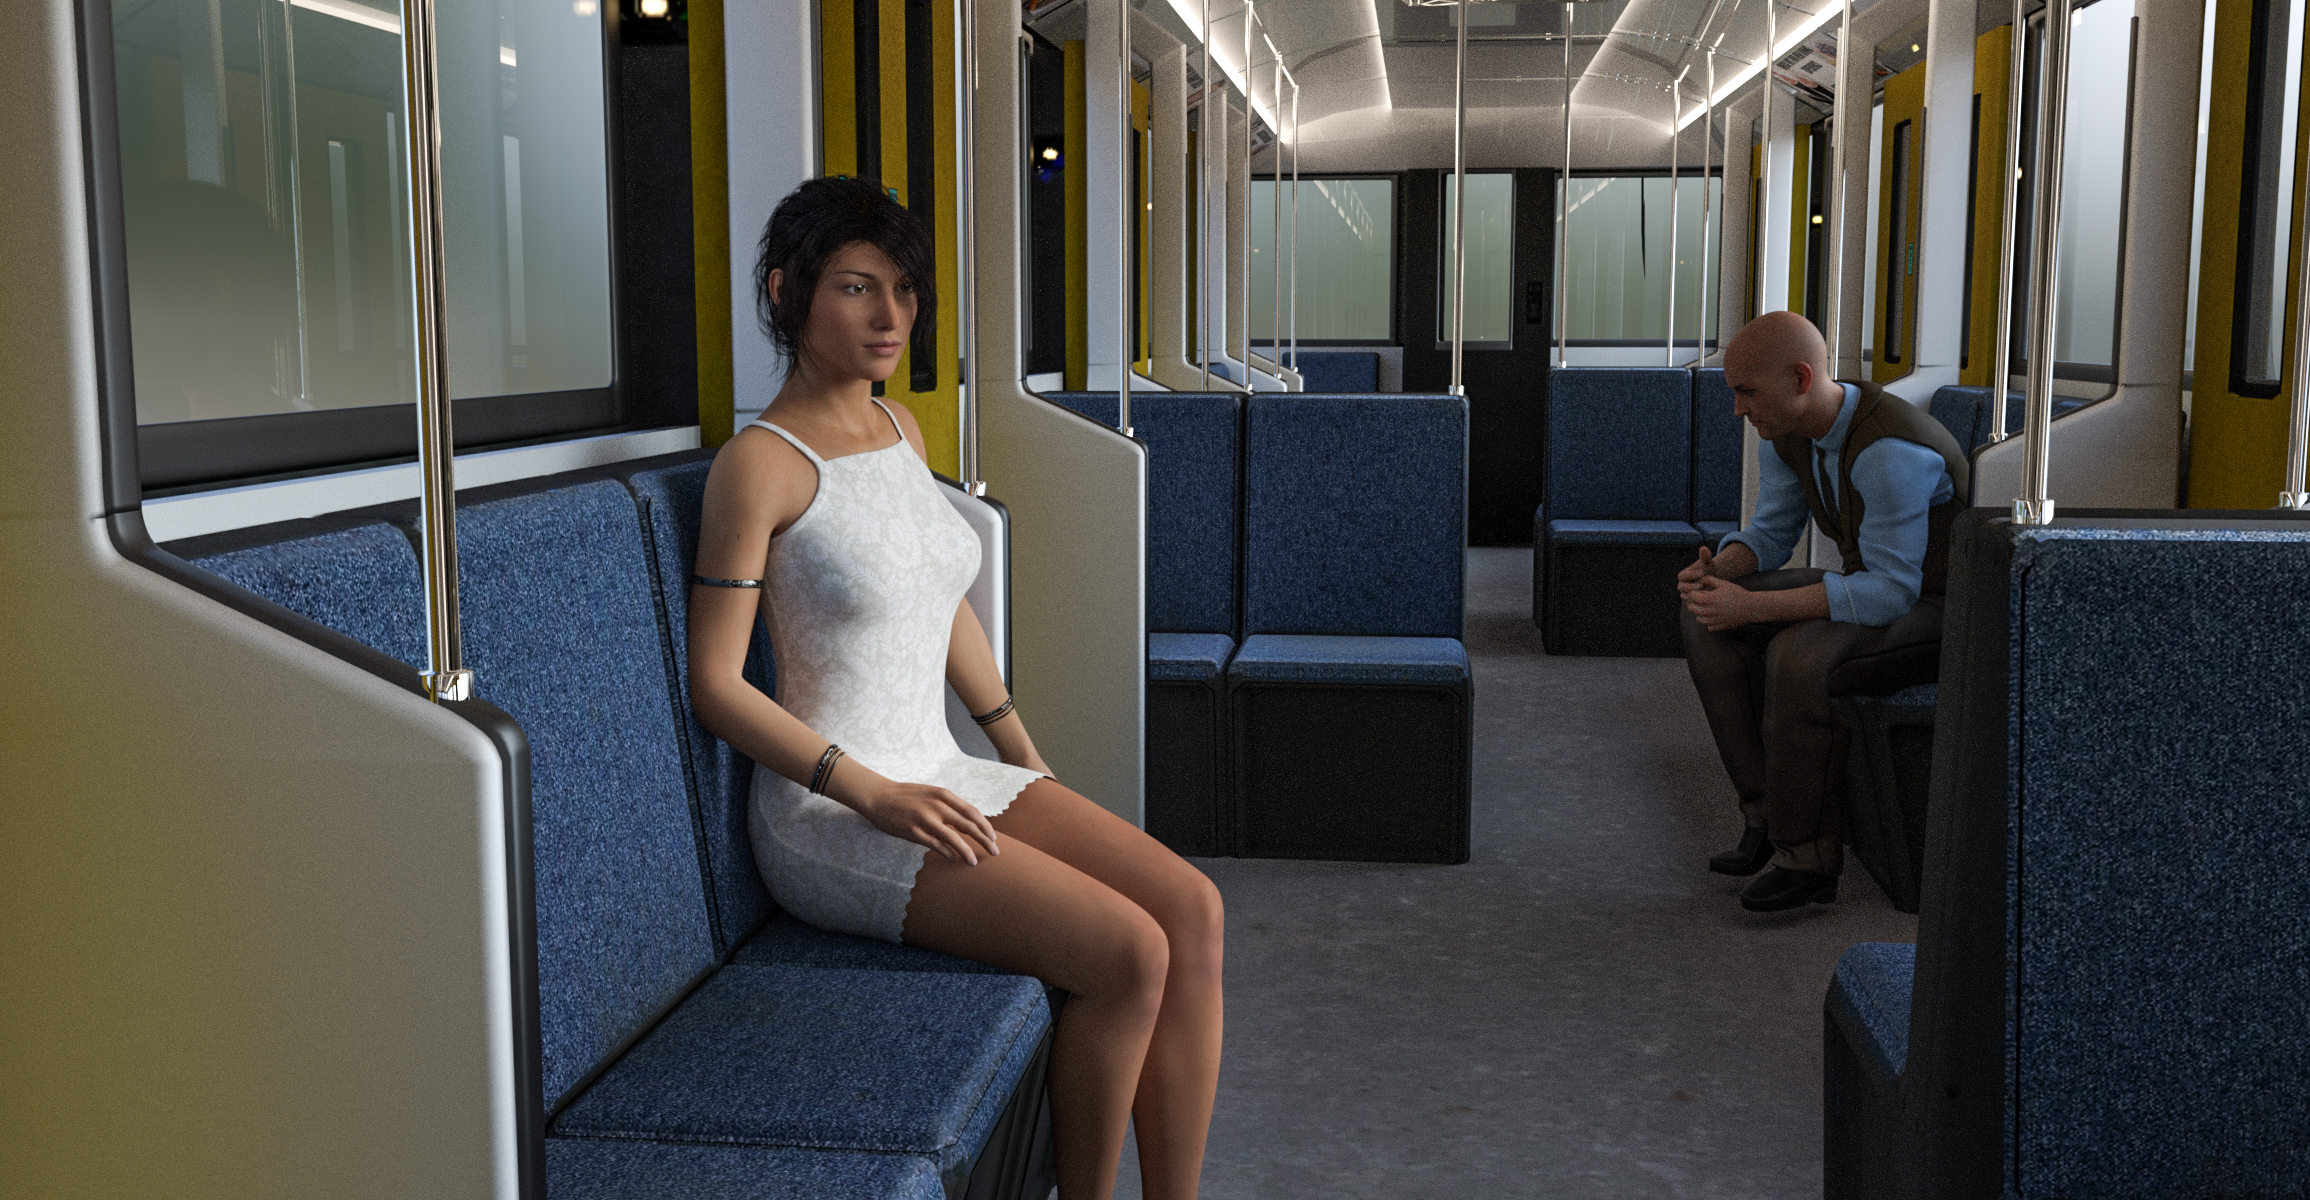 Subway Train For Iray by: Serum, 3D Models by Daz 3D